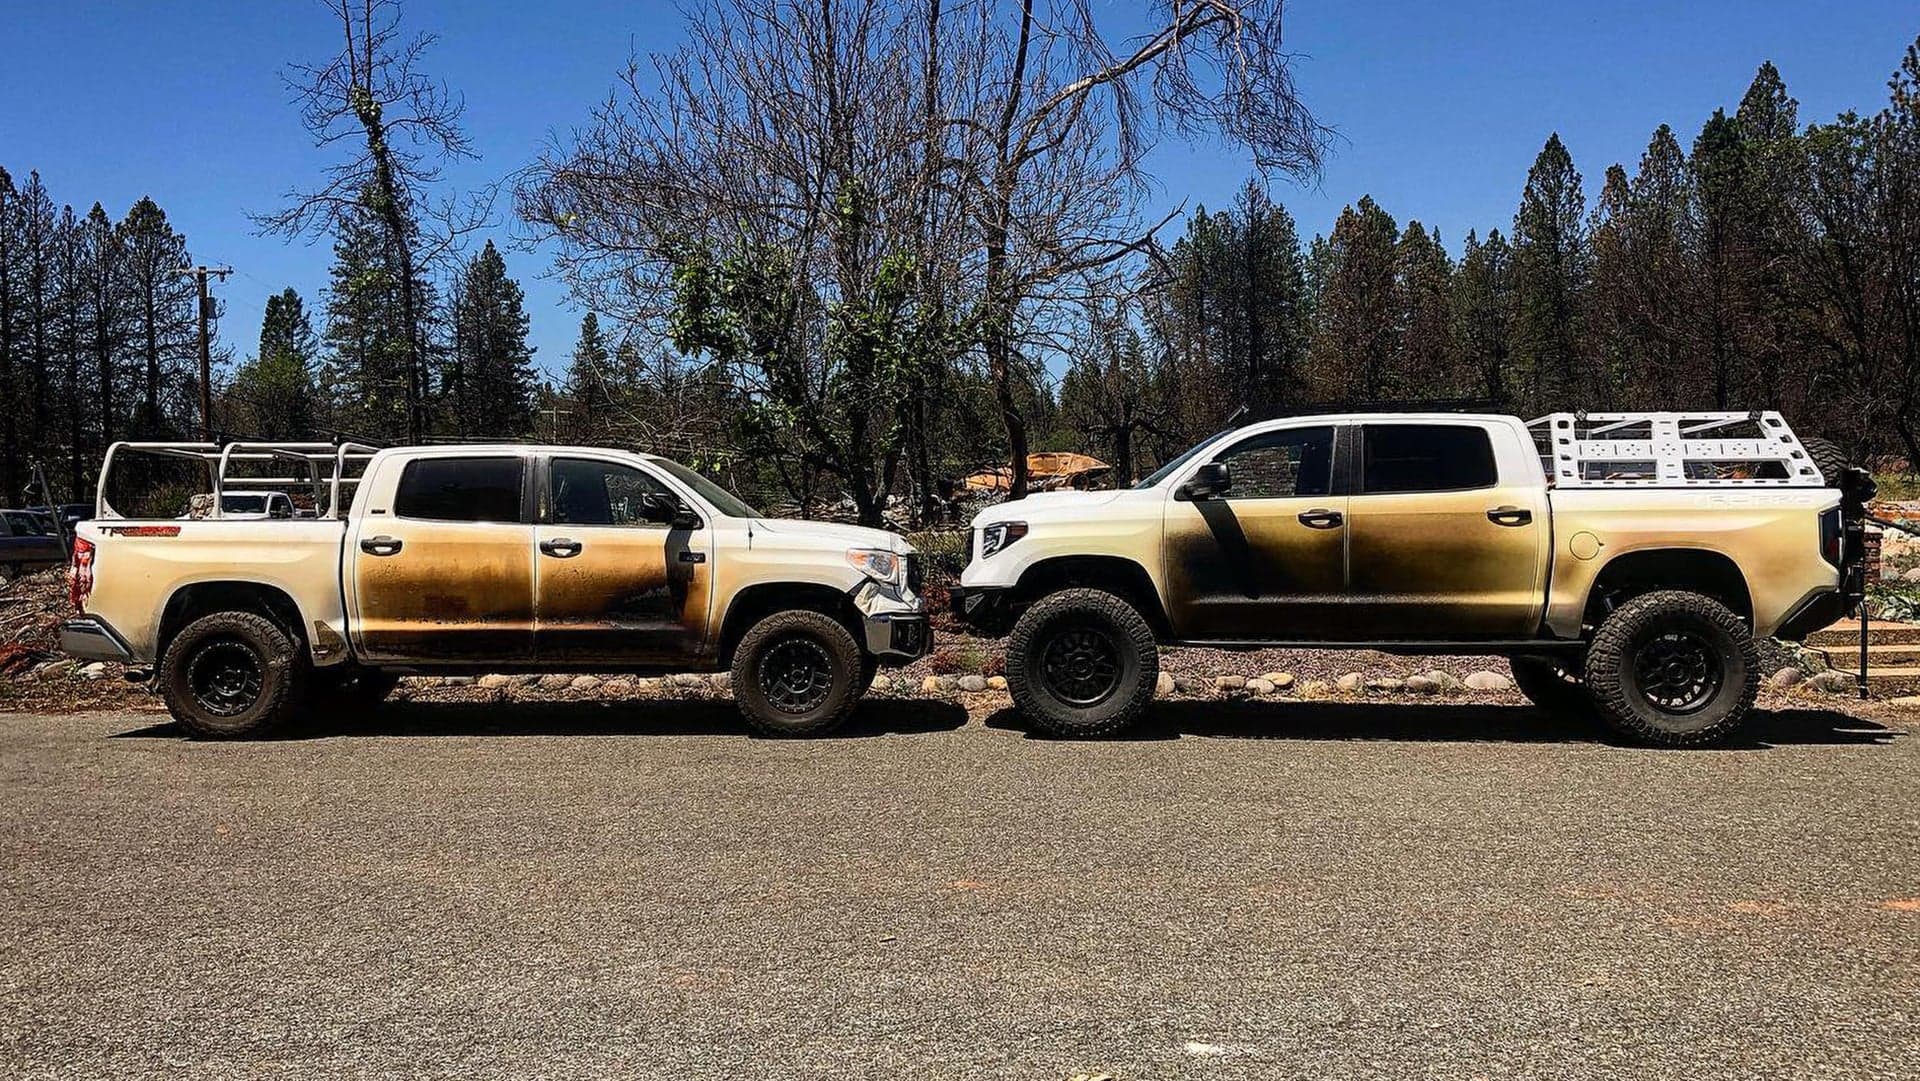 California Wildfire Hero Gives Toyota Tundra a ‘Hot’ New Look to Honor Fallen Truck